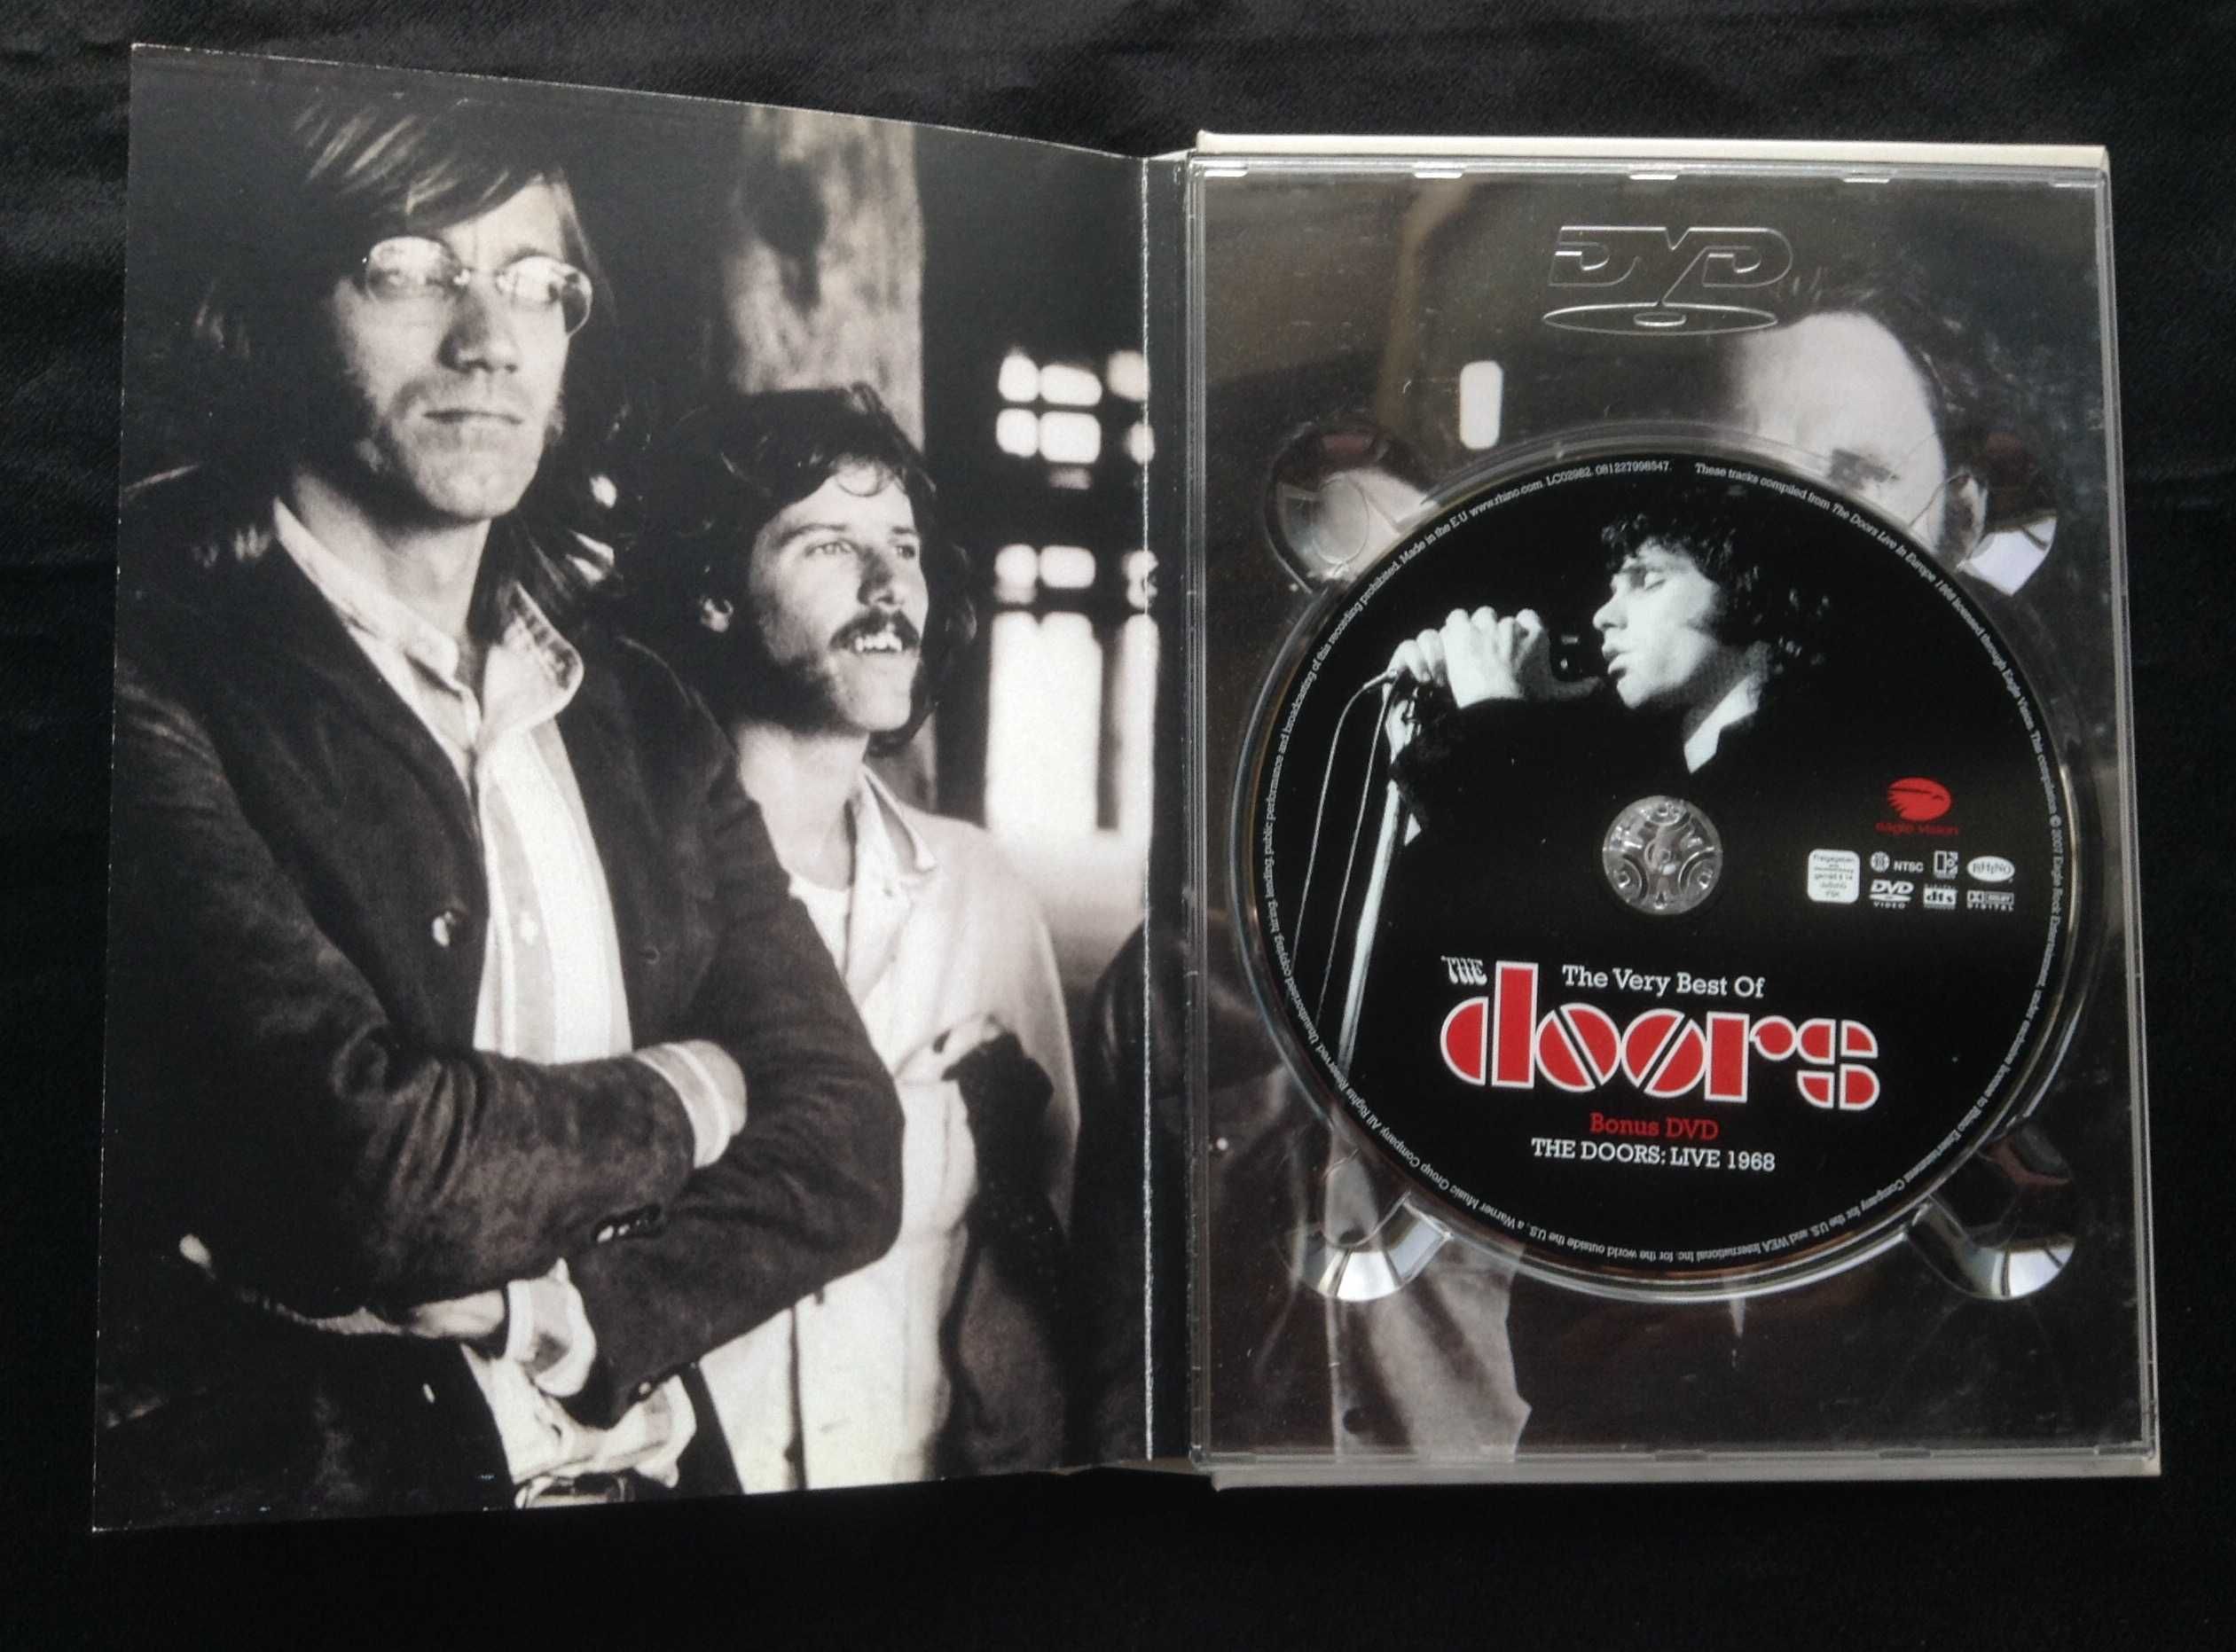 The Very Best Of The Doors 40th Anniversary Edition 2007 2 CD + 1 DVD